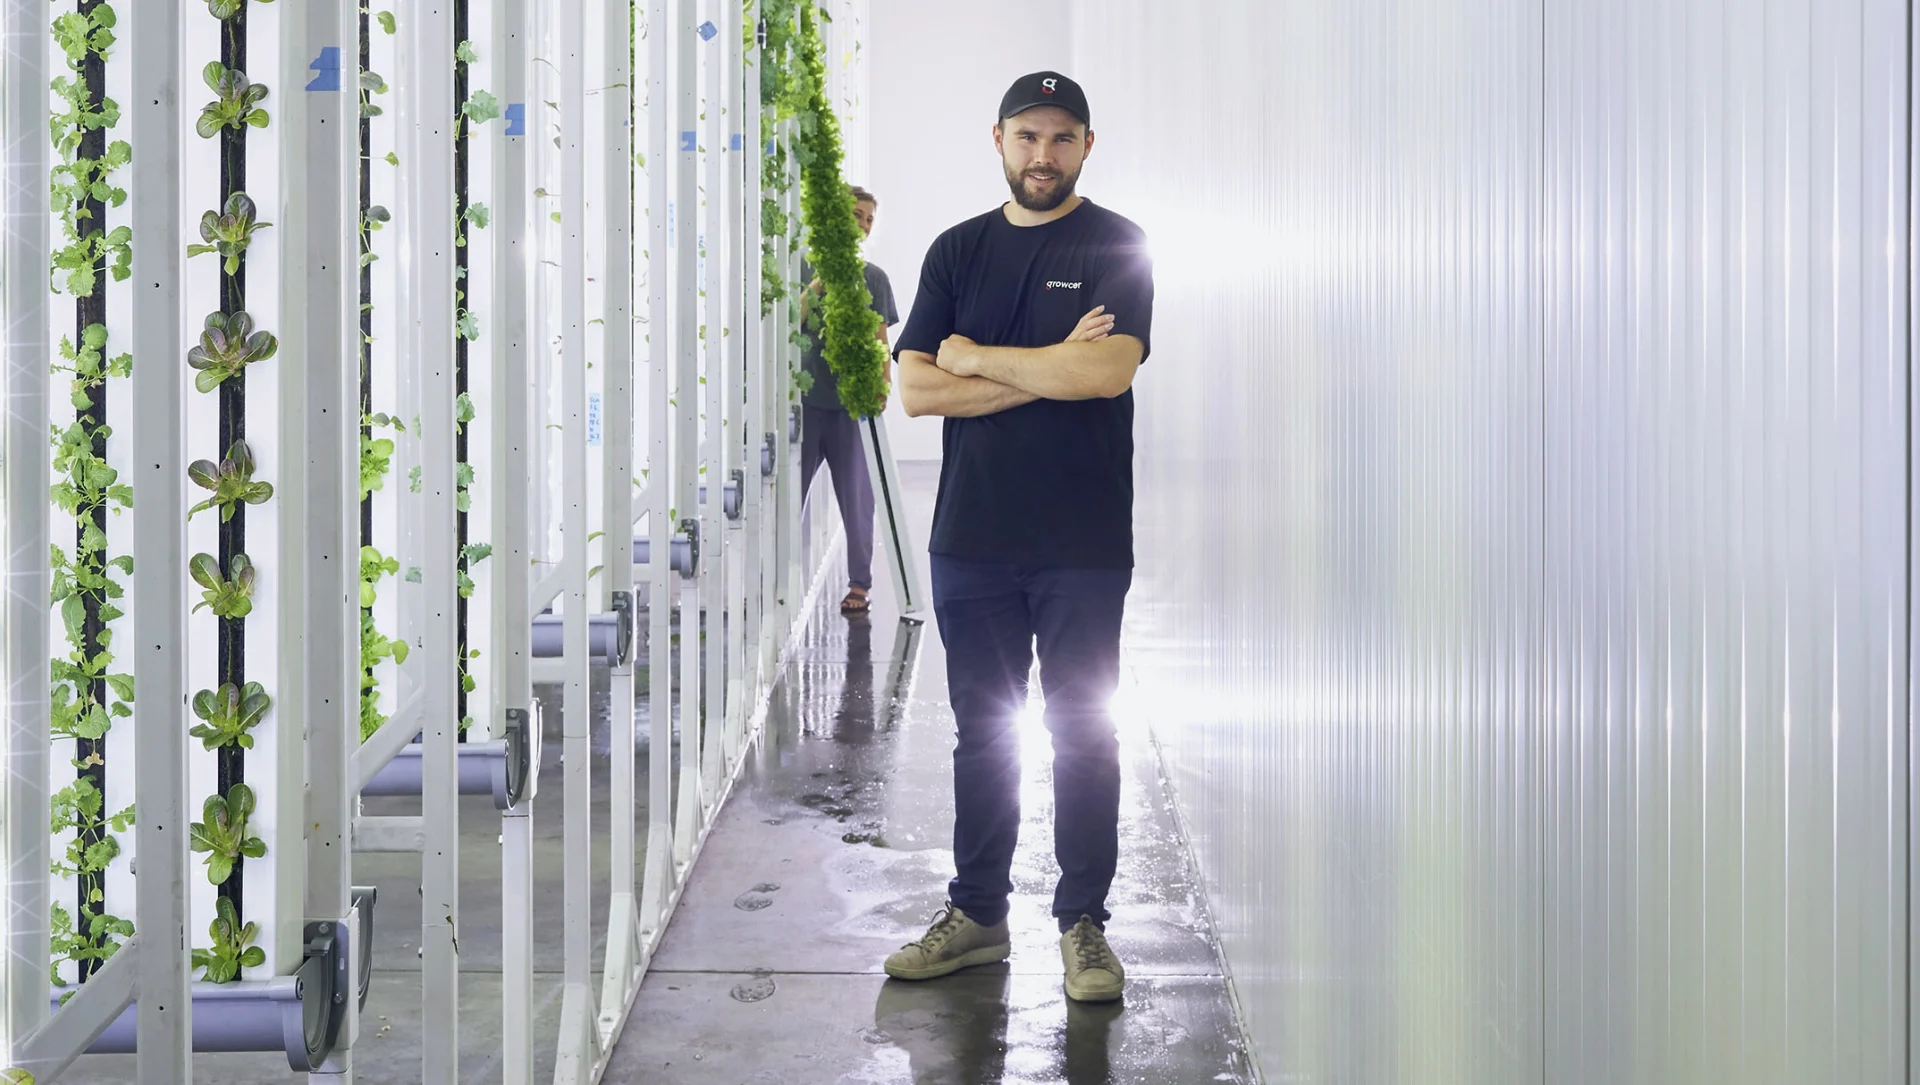 Growcer founder Marcel Florian stands amidst the vertically growing plants.